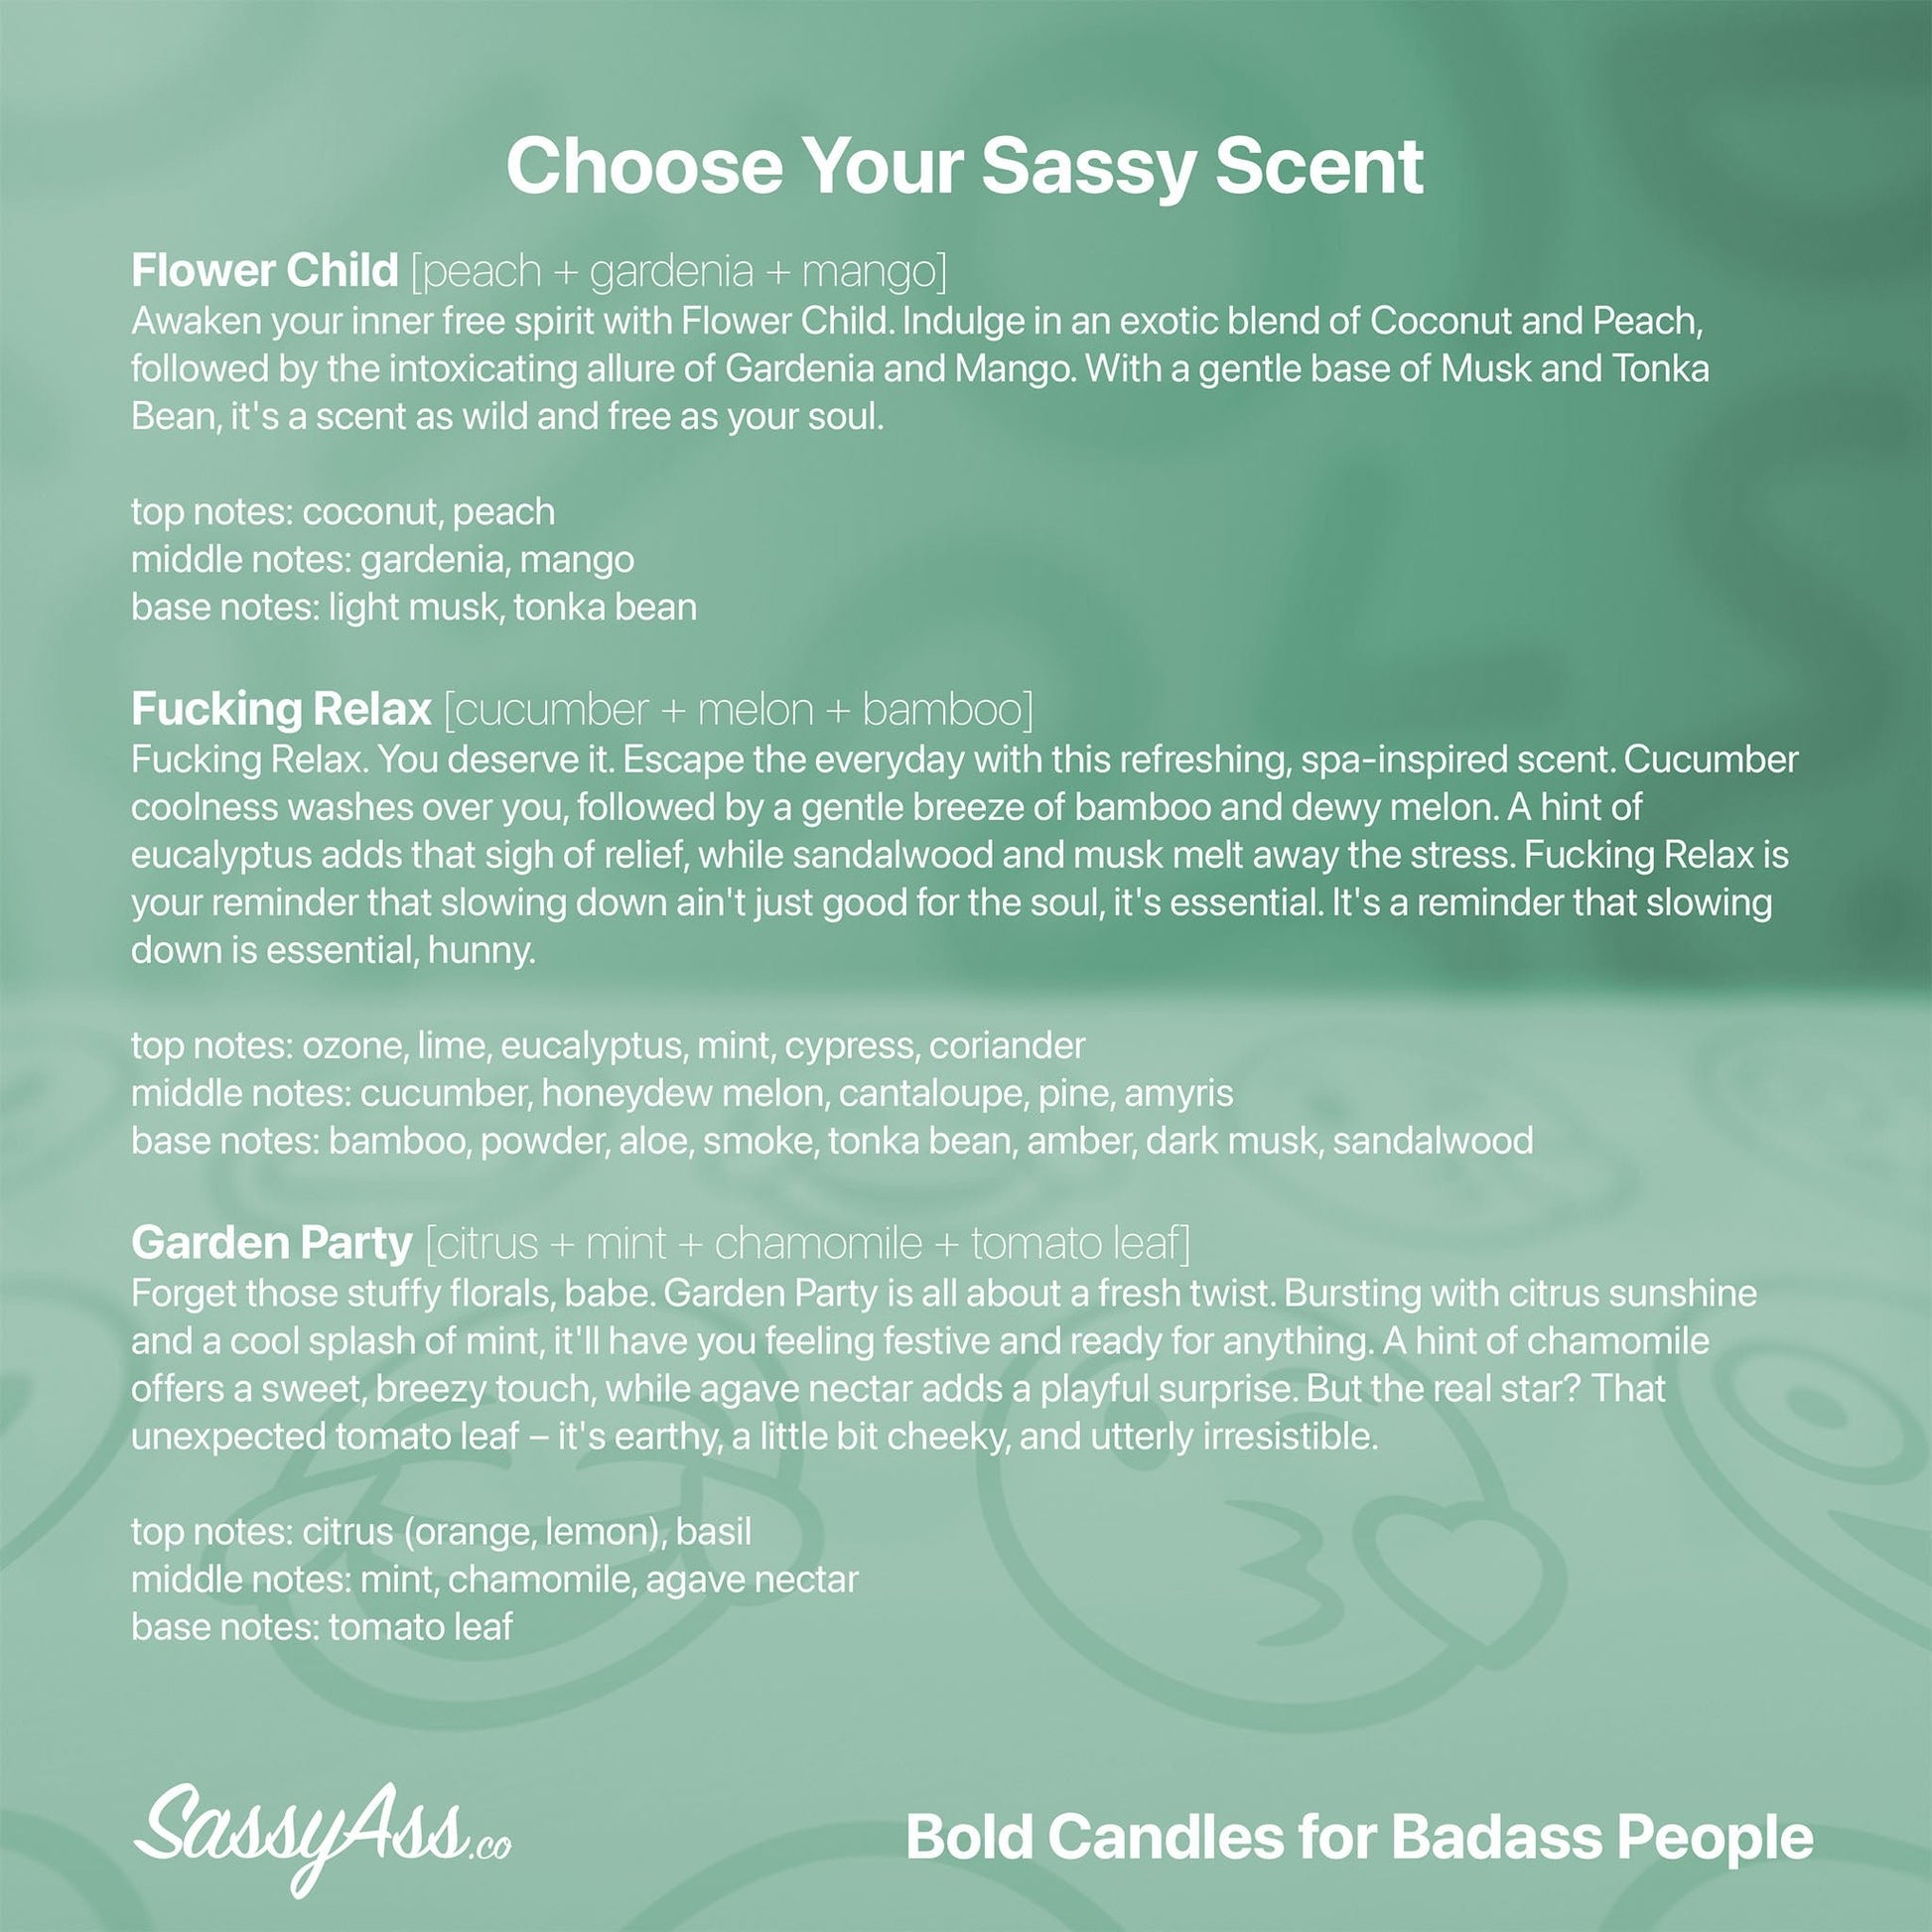 Manifesting Pedro Pascal In My DMs - Scented Soy Candle: Eco-Friendly, Handcrafted Celeb Crush Charm for Pop Culture Devotees & Sassy Home Decor Lovers - the back cover of the book choose your sassy scent - SassyAss.co